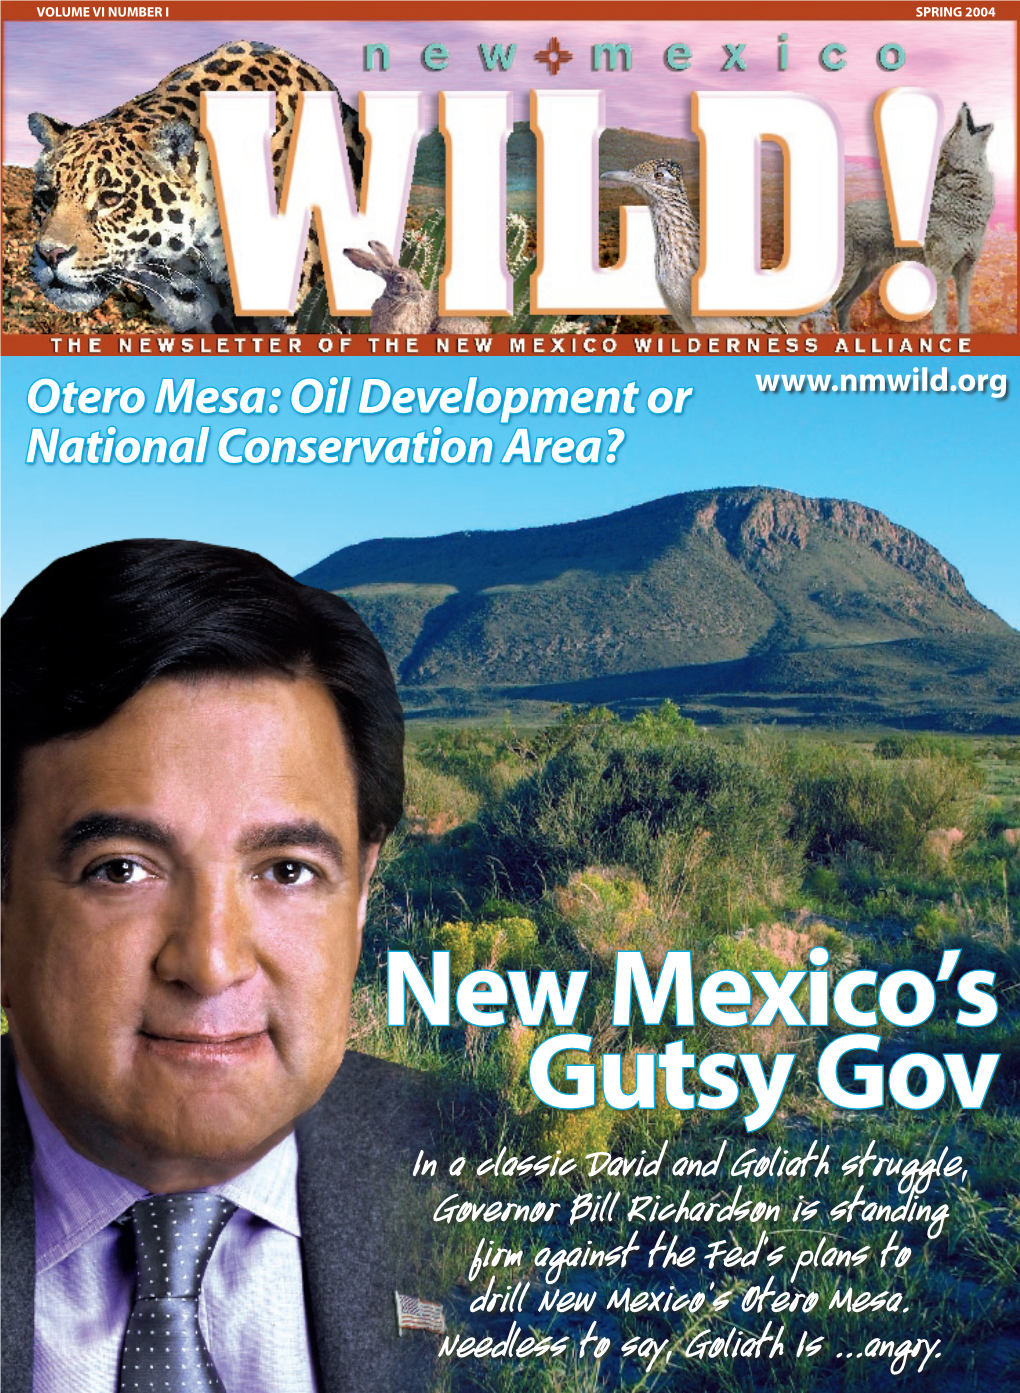 In a Classic David and Goliath Struggle, Governor Bill Richardson Is Standing Firm Against the Fed’S Plans to Drill New Mexico’S Otero Mesa